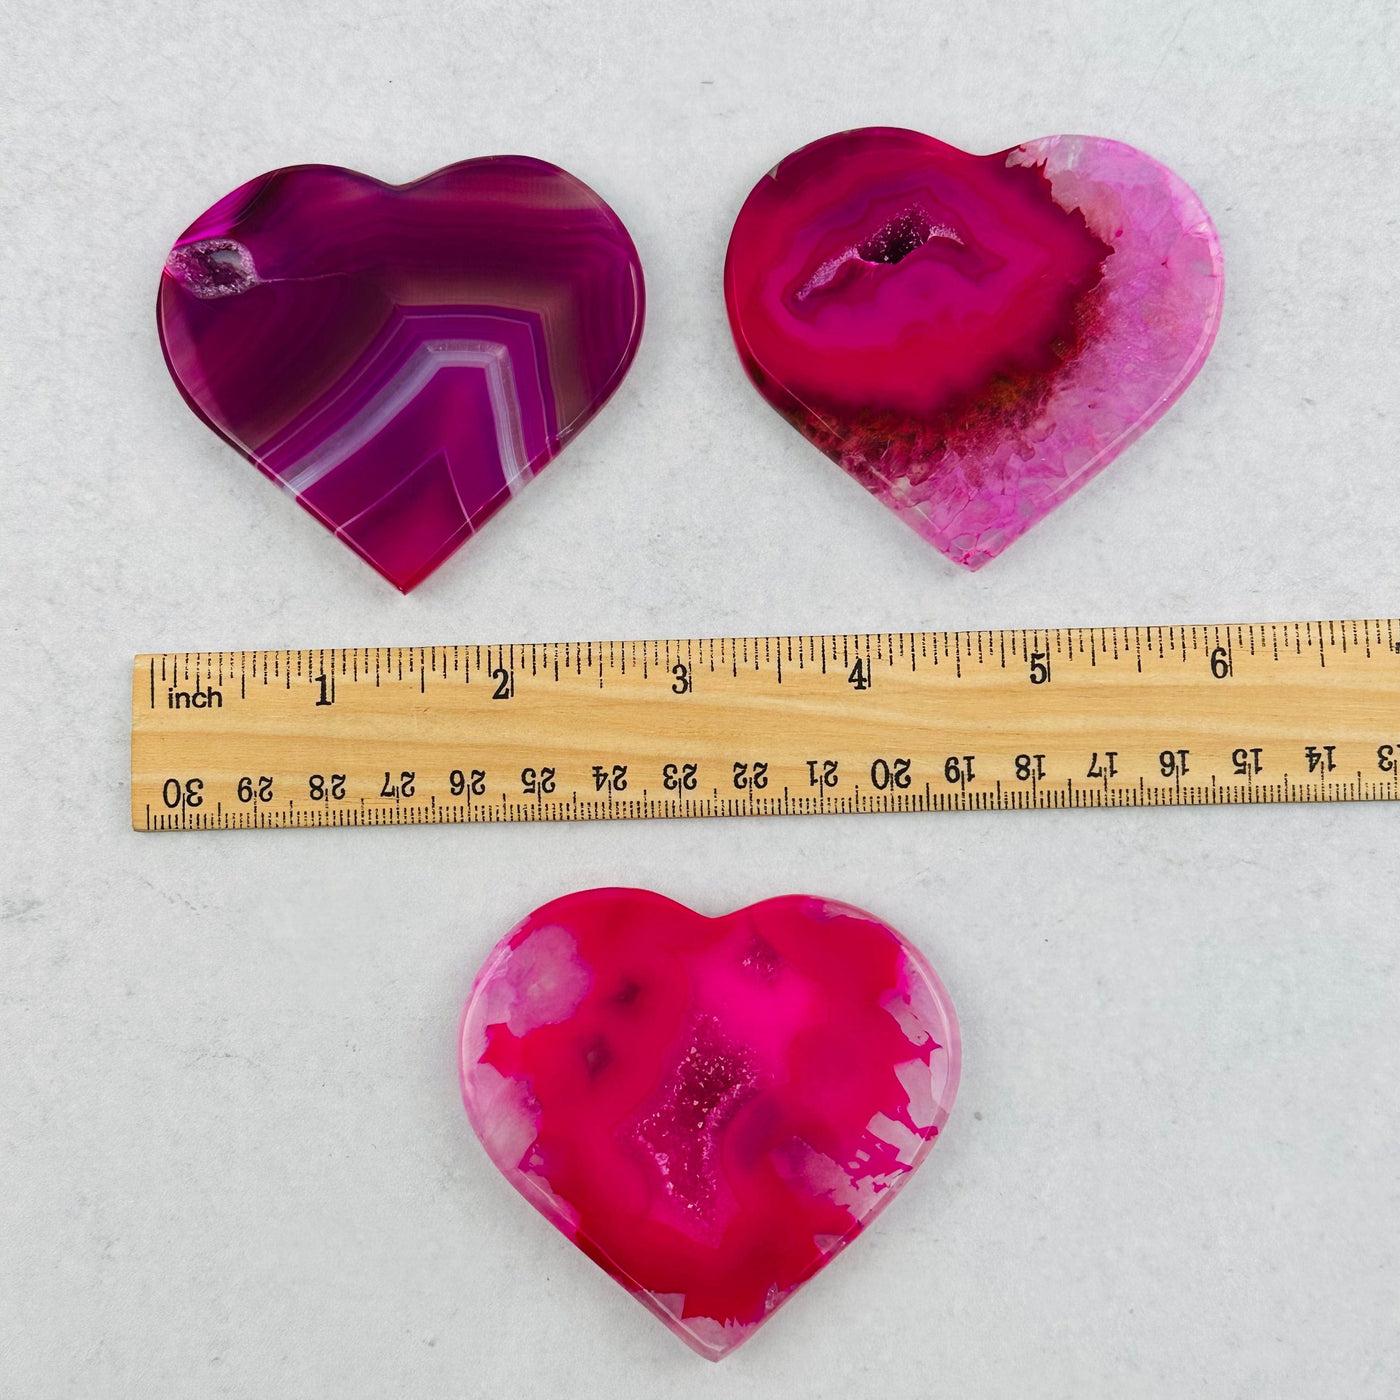 heart slices next to a ruler for size reference 